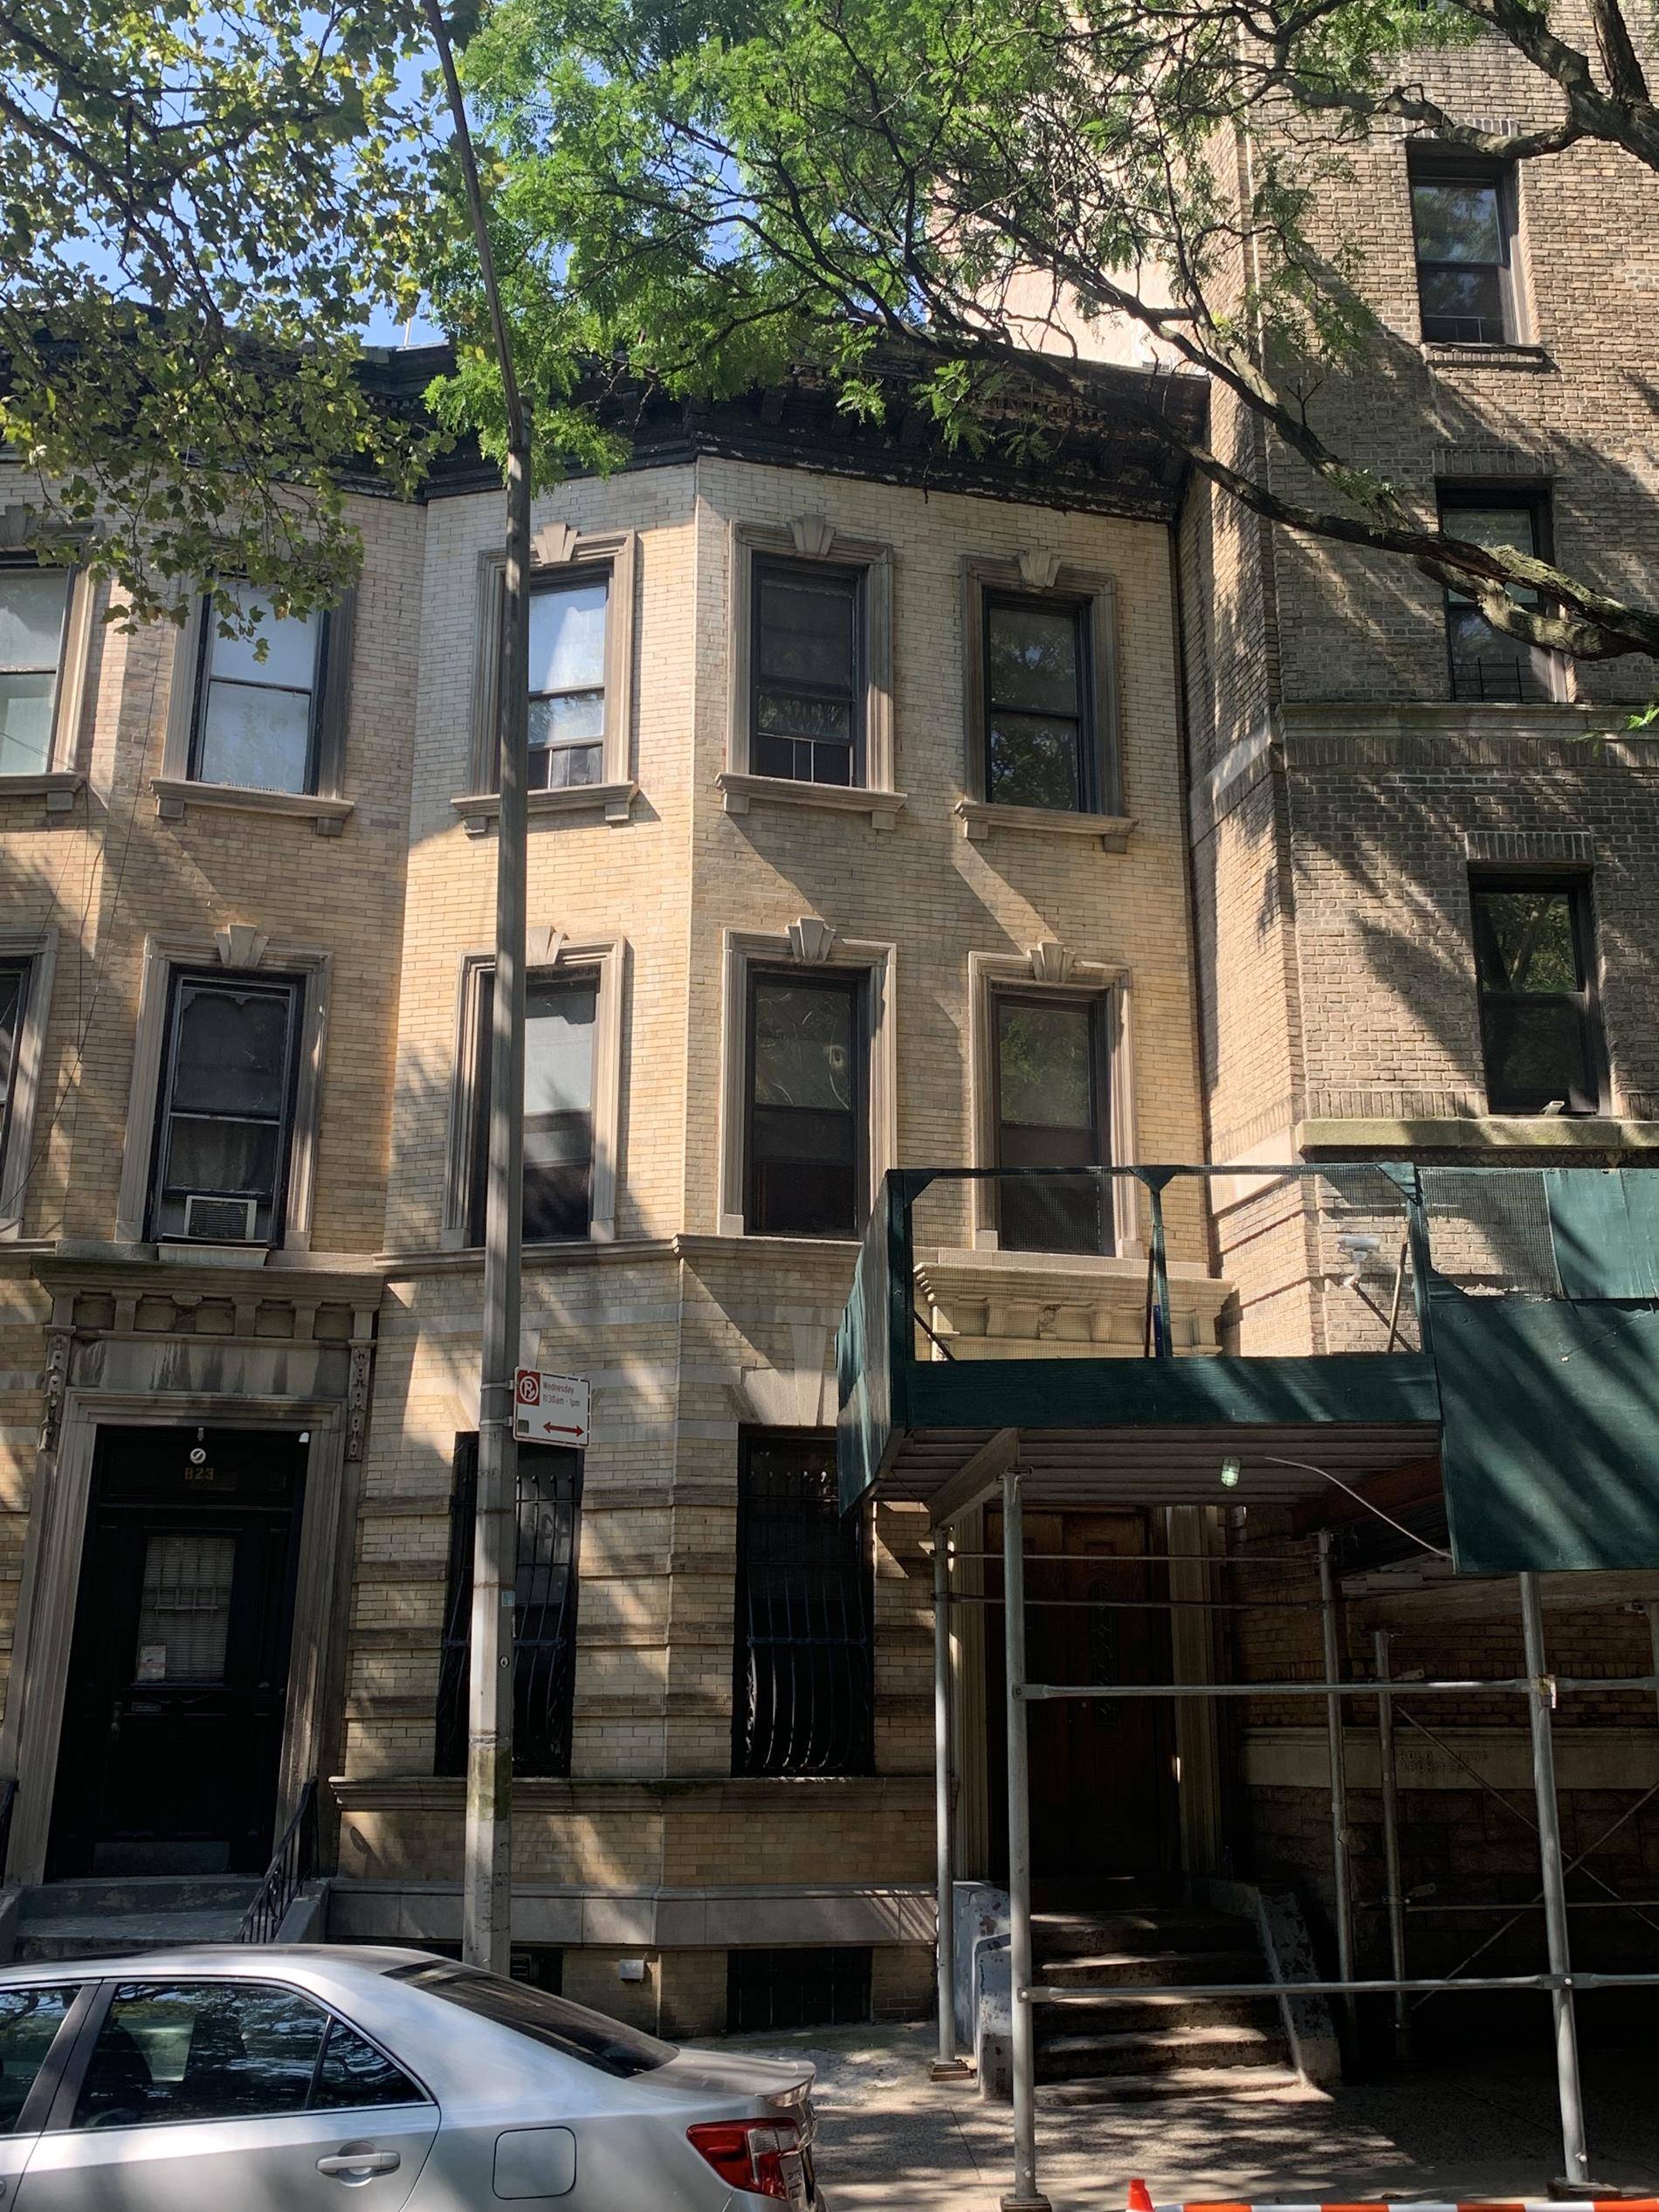 PRIME Washington Heights location, large townhouse with lot s of possibilities, Delivered vacant, legal three family home.